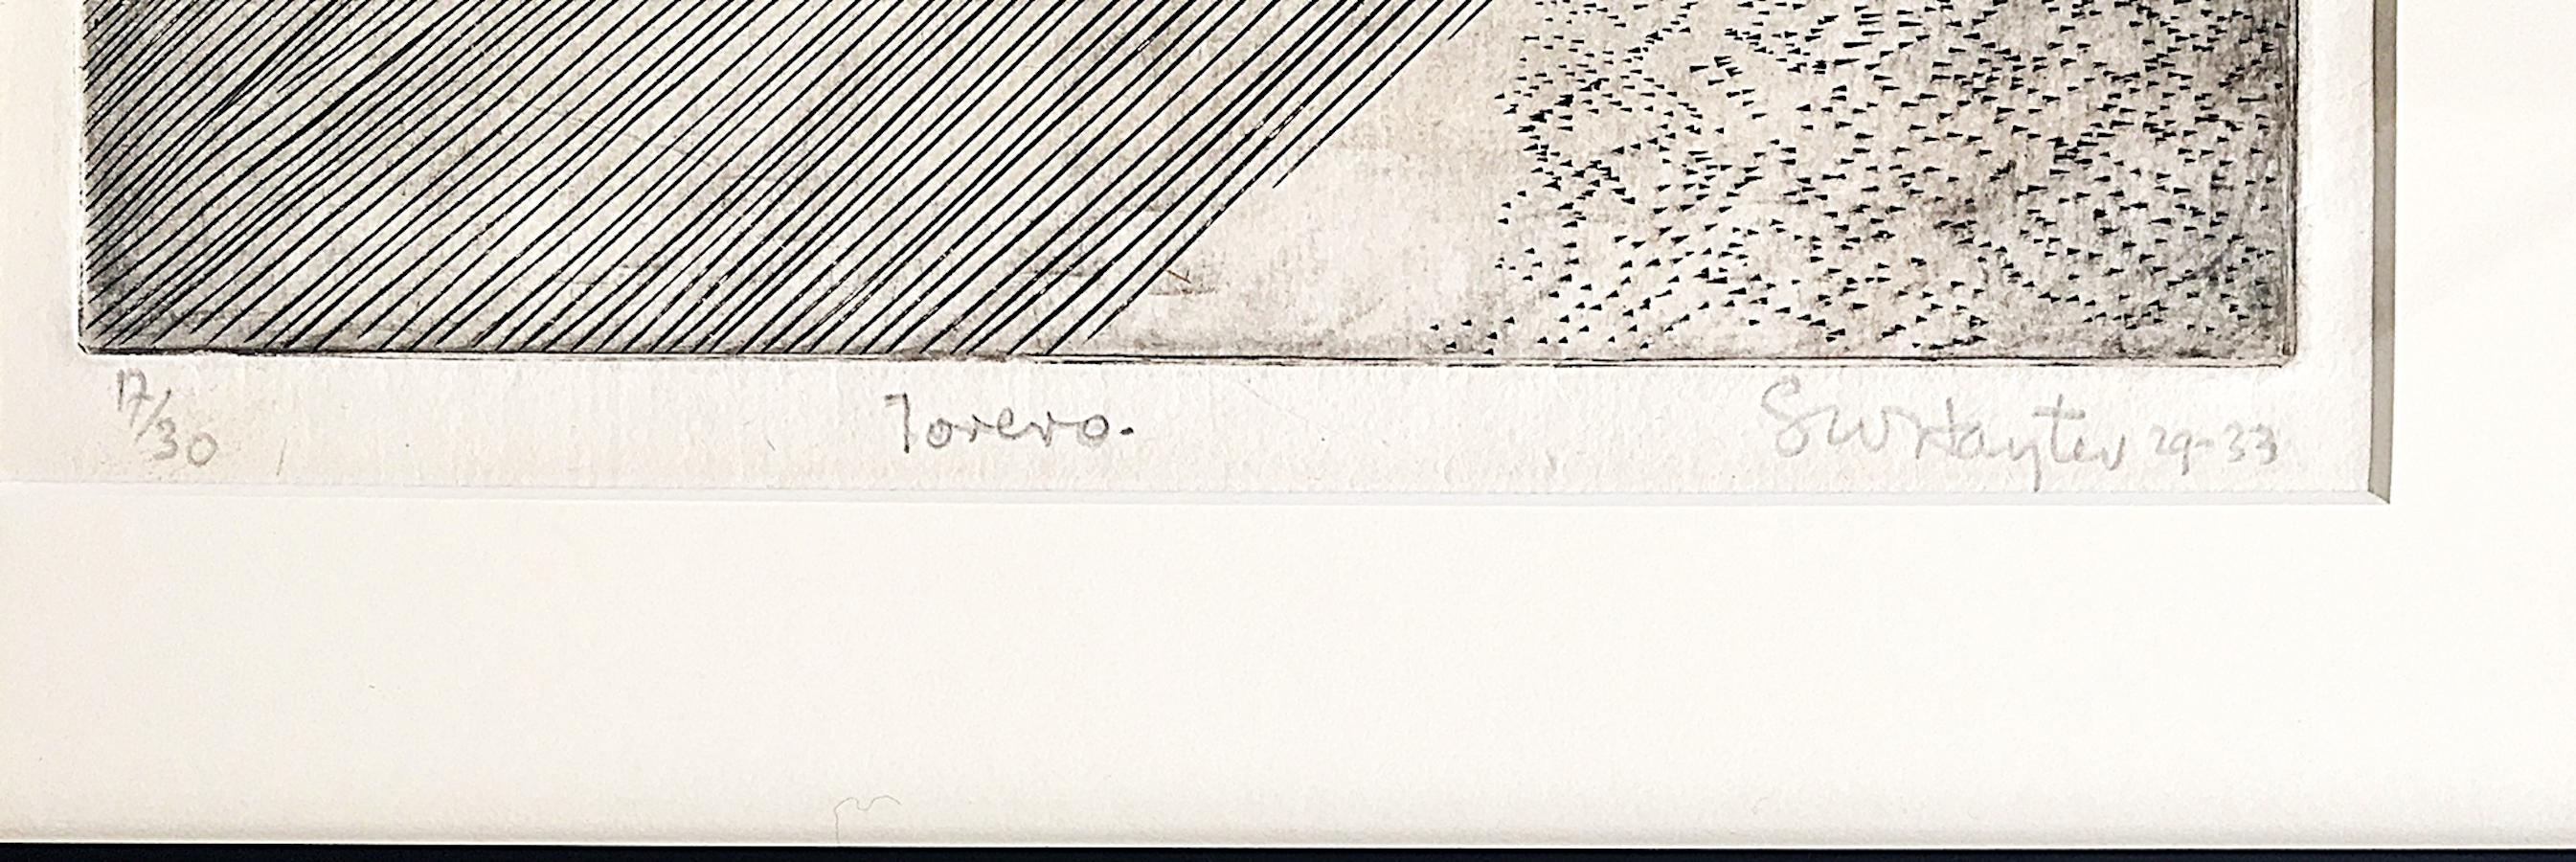 Stanley William Hayter
Torero (de-accessioned from the Denver Art Museum), 1929-1933
Engraving on laid paper, third (final) state, on heavy BFK Rives off-white wove paper
Signed, titled, numbered 17 from the edition of 30 and dated by the artist on